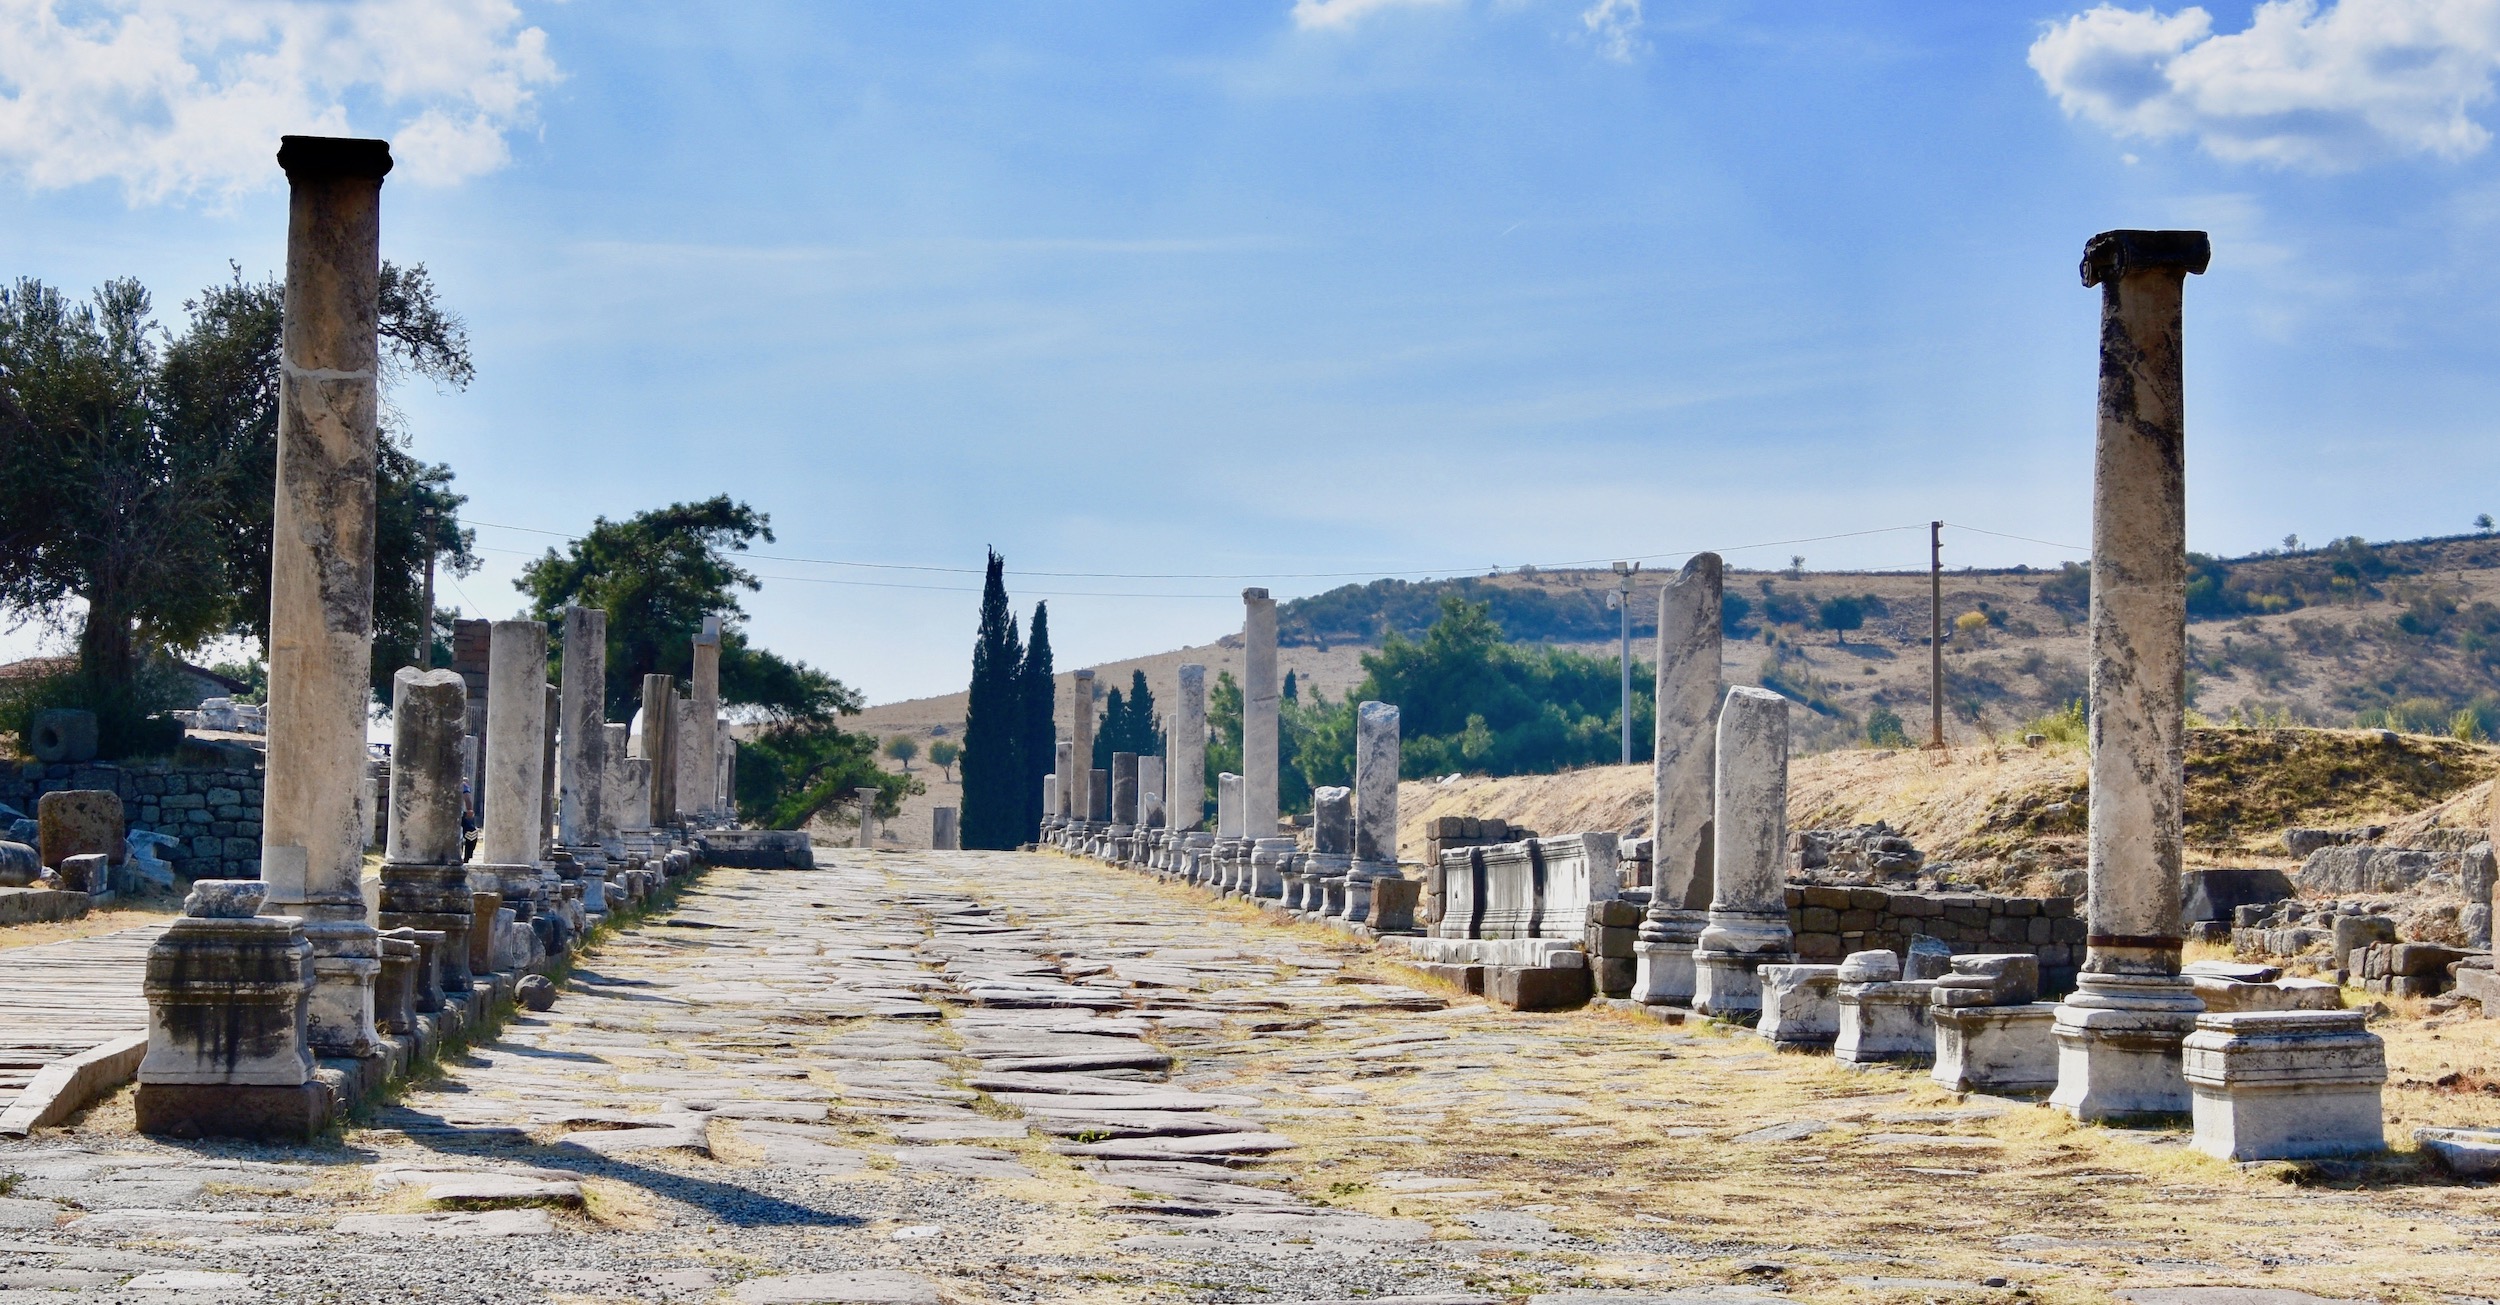 Roman Processional Way, Asclepeion of Galenp